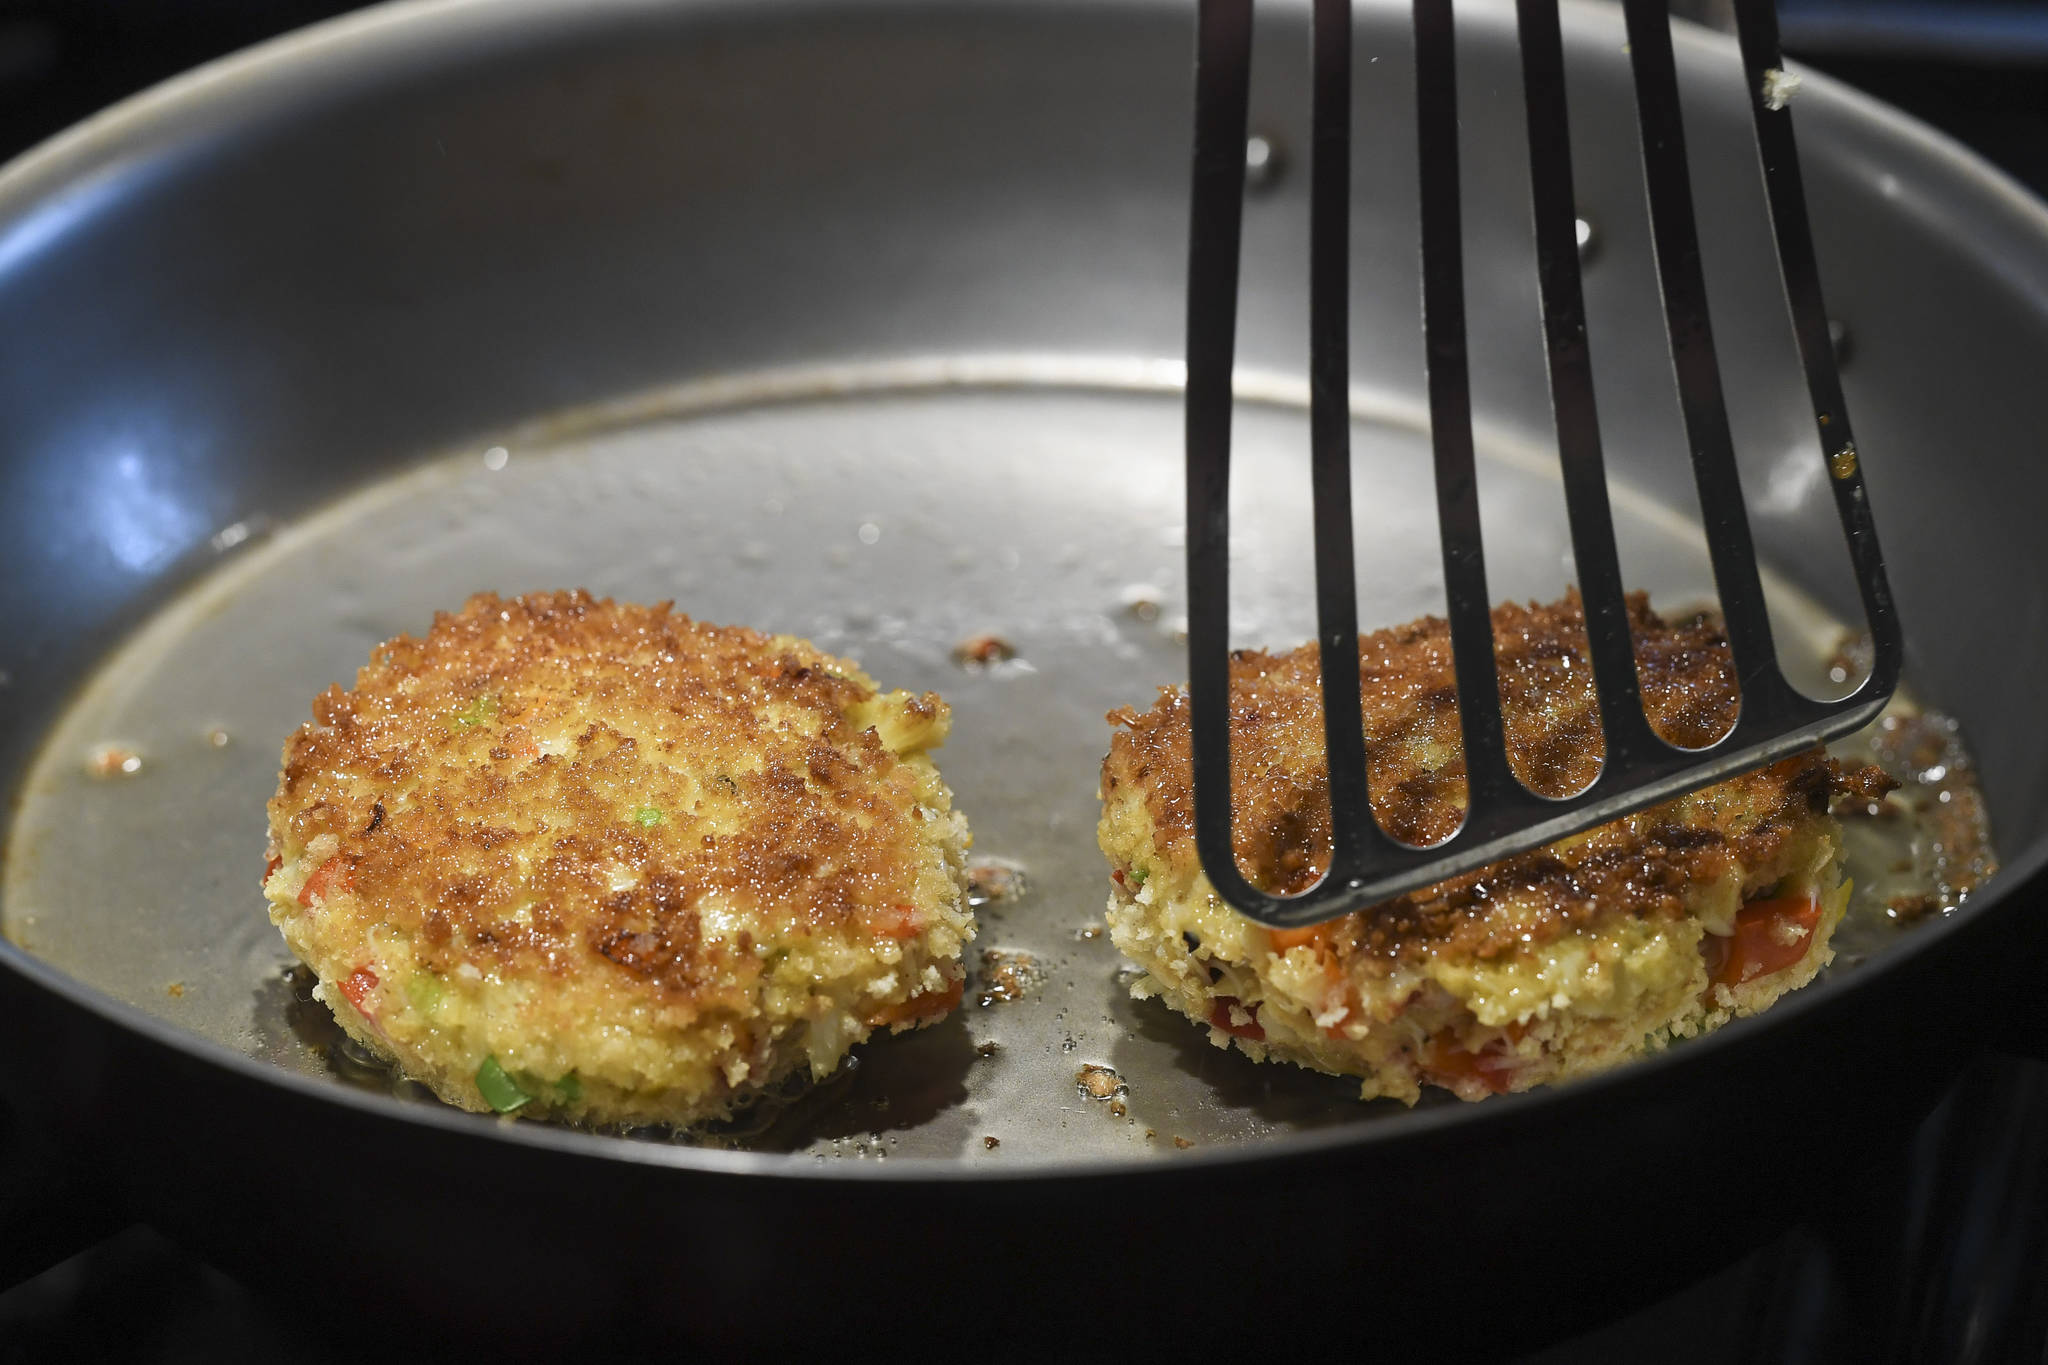 Erin Anais Heist prepares crab cakes to go with a twisted stalk salad on Friday, May 10, 2019. (Michael Penn | Juneau Empire)